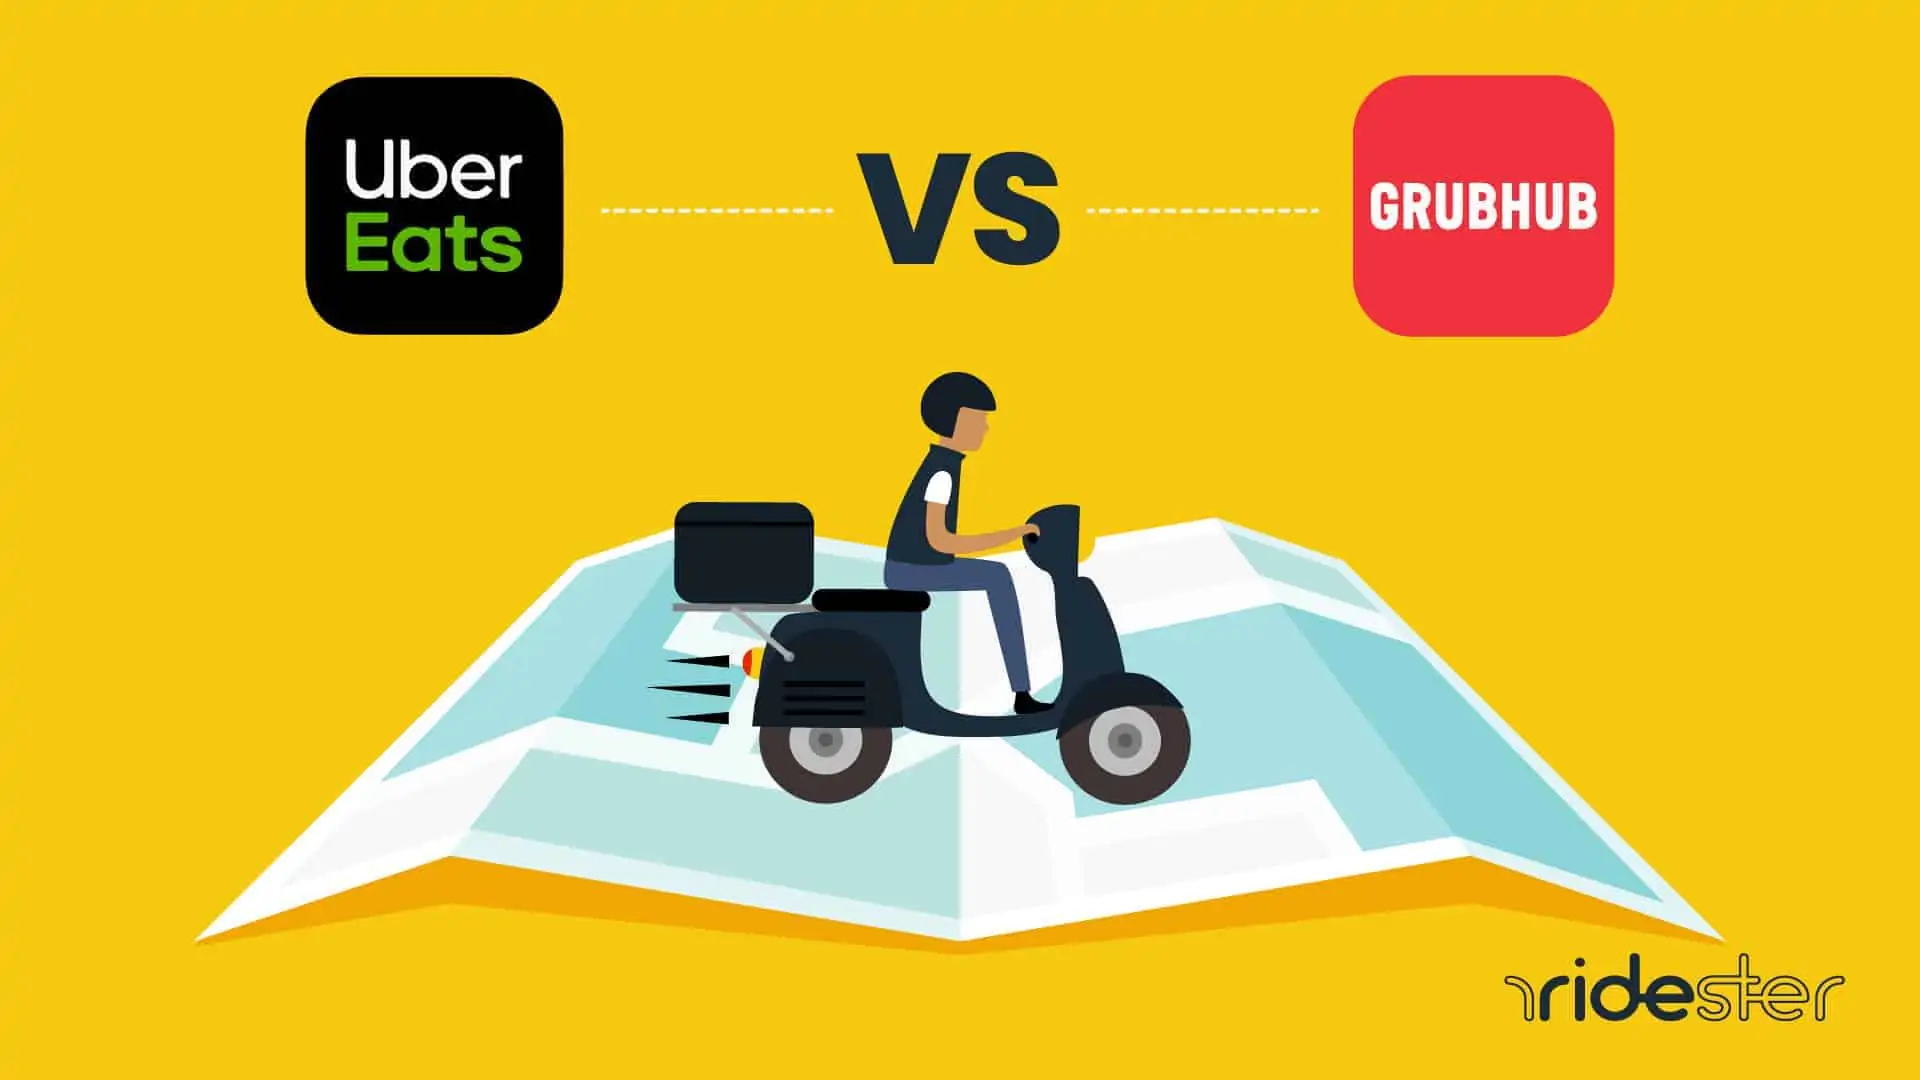 vector graphics image showing grubhub vs uber eats bags next to one another